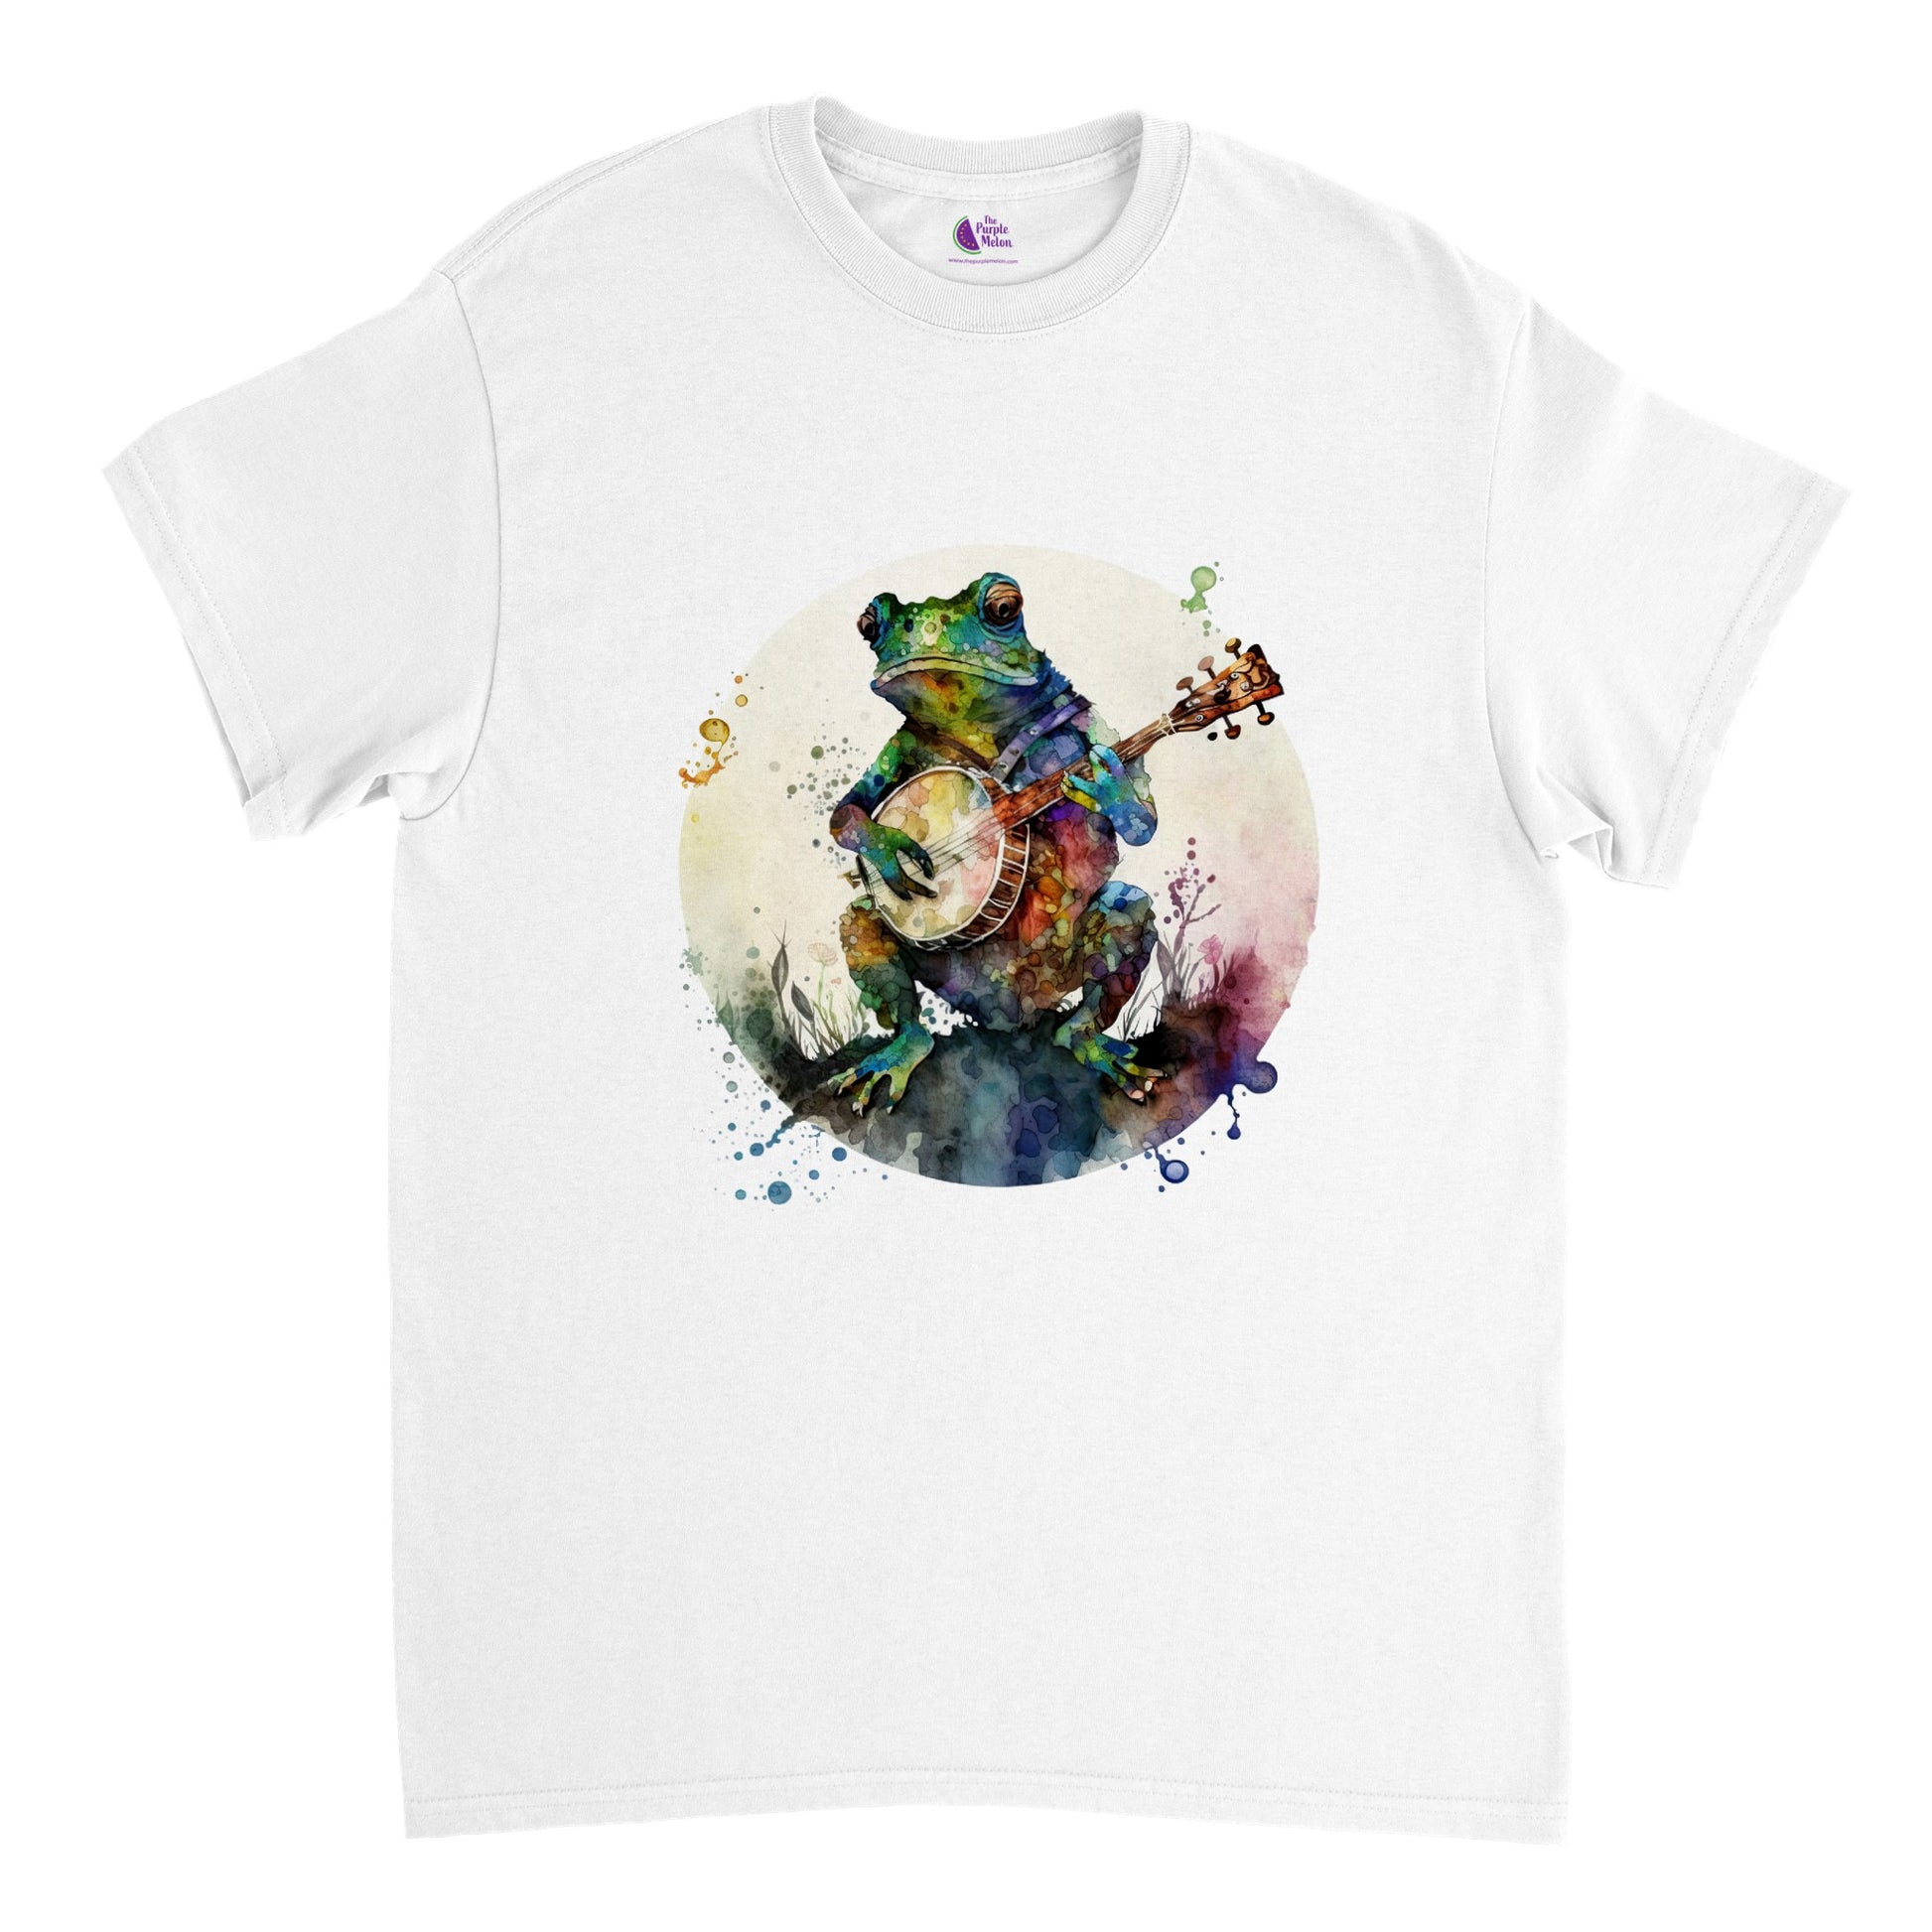 white t-shirt with a frog playing a banjo print